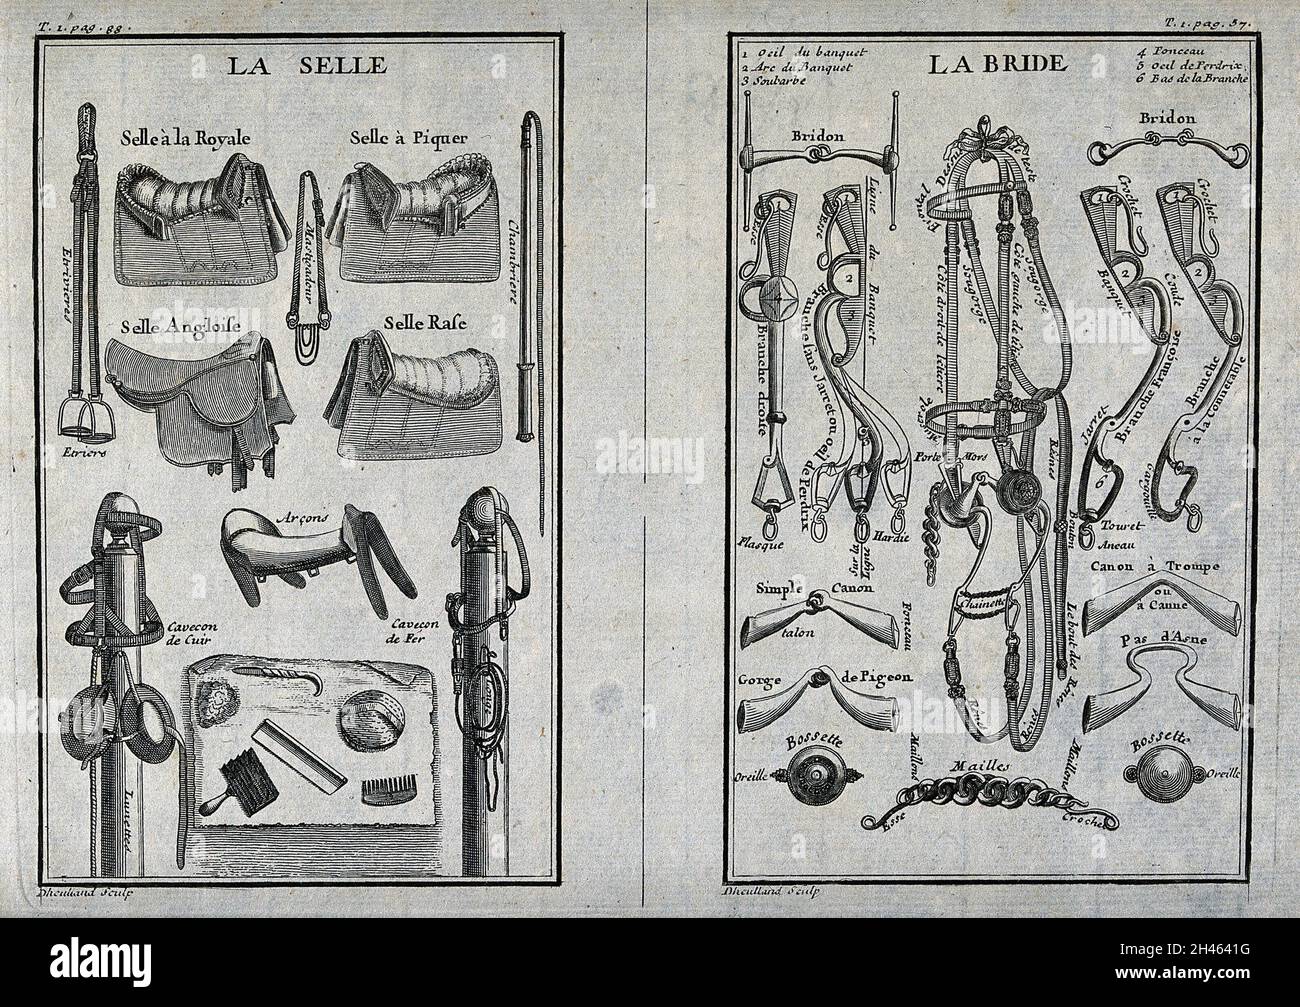 Left, a variety of saddles, harnesses and grooming equipment; right, a variety of headgears, bridles, snaffles and clasps. Engraving by G. Dheulland. Stock Photo